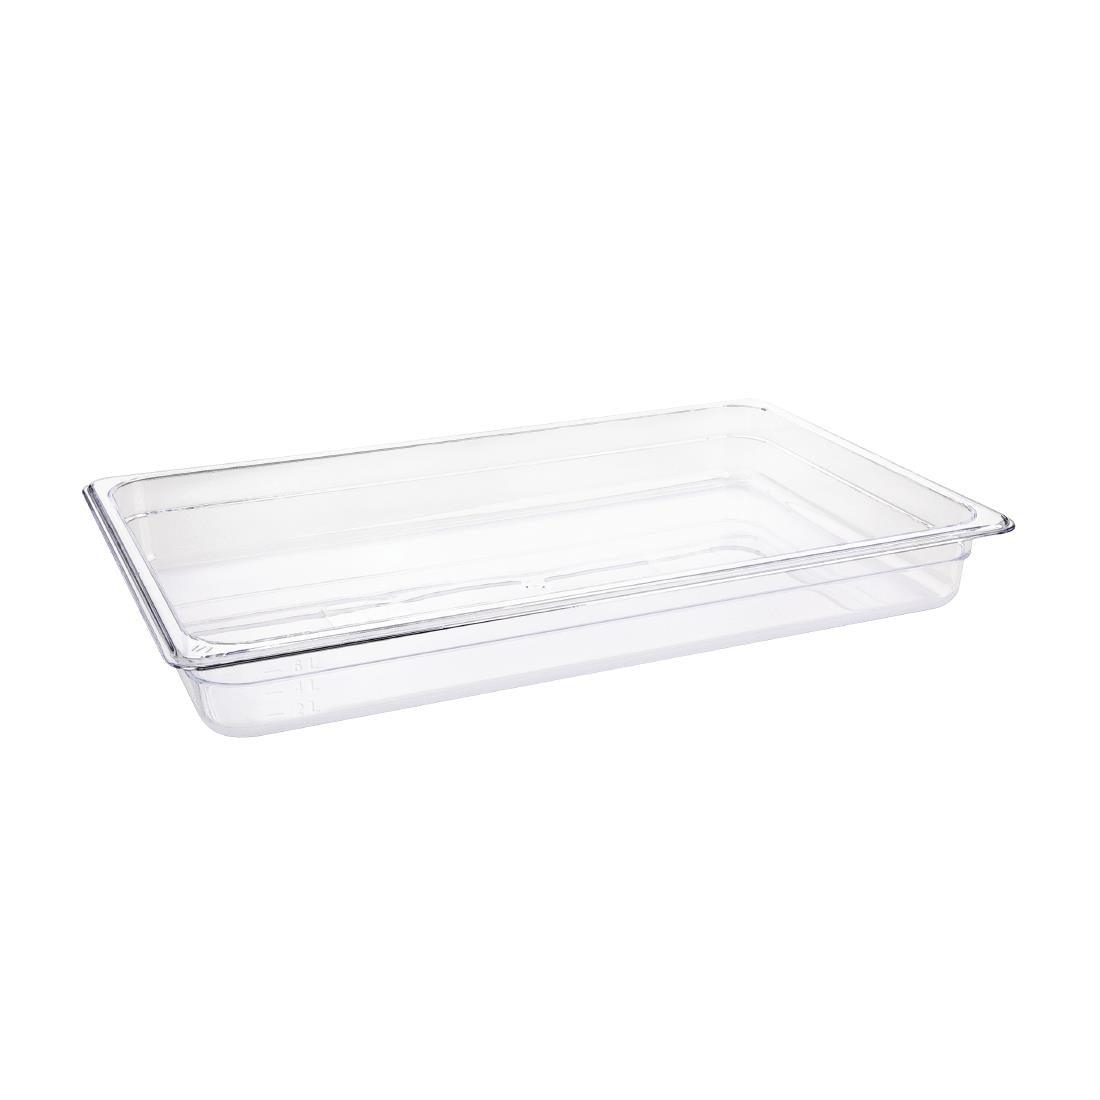 Vogue Clear Polycarbonate 1/1 Gastronorm Tray 65mm - HospoStore